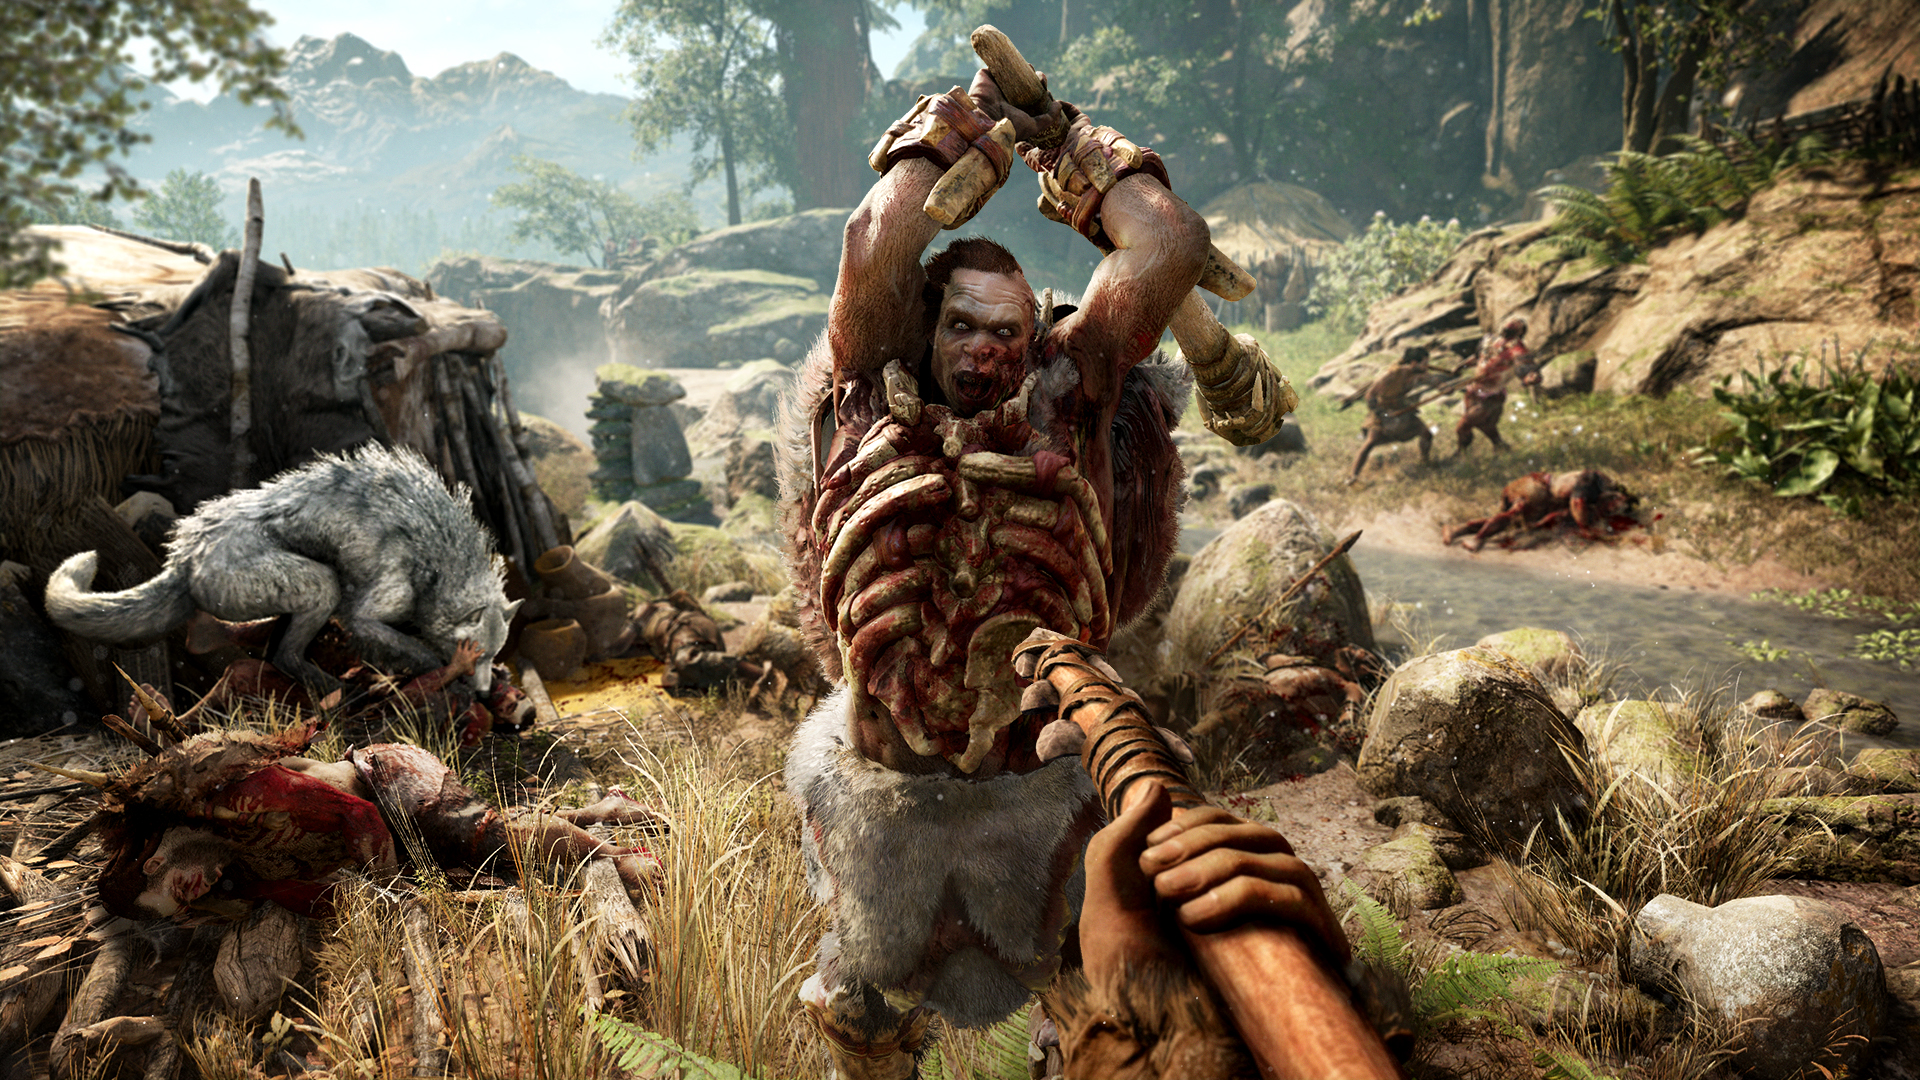 10 best Far Cry games to play today